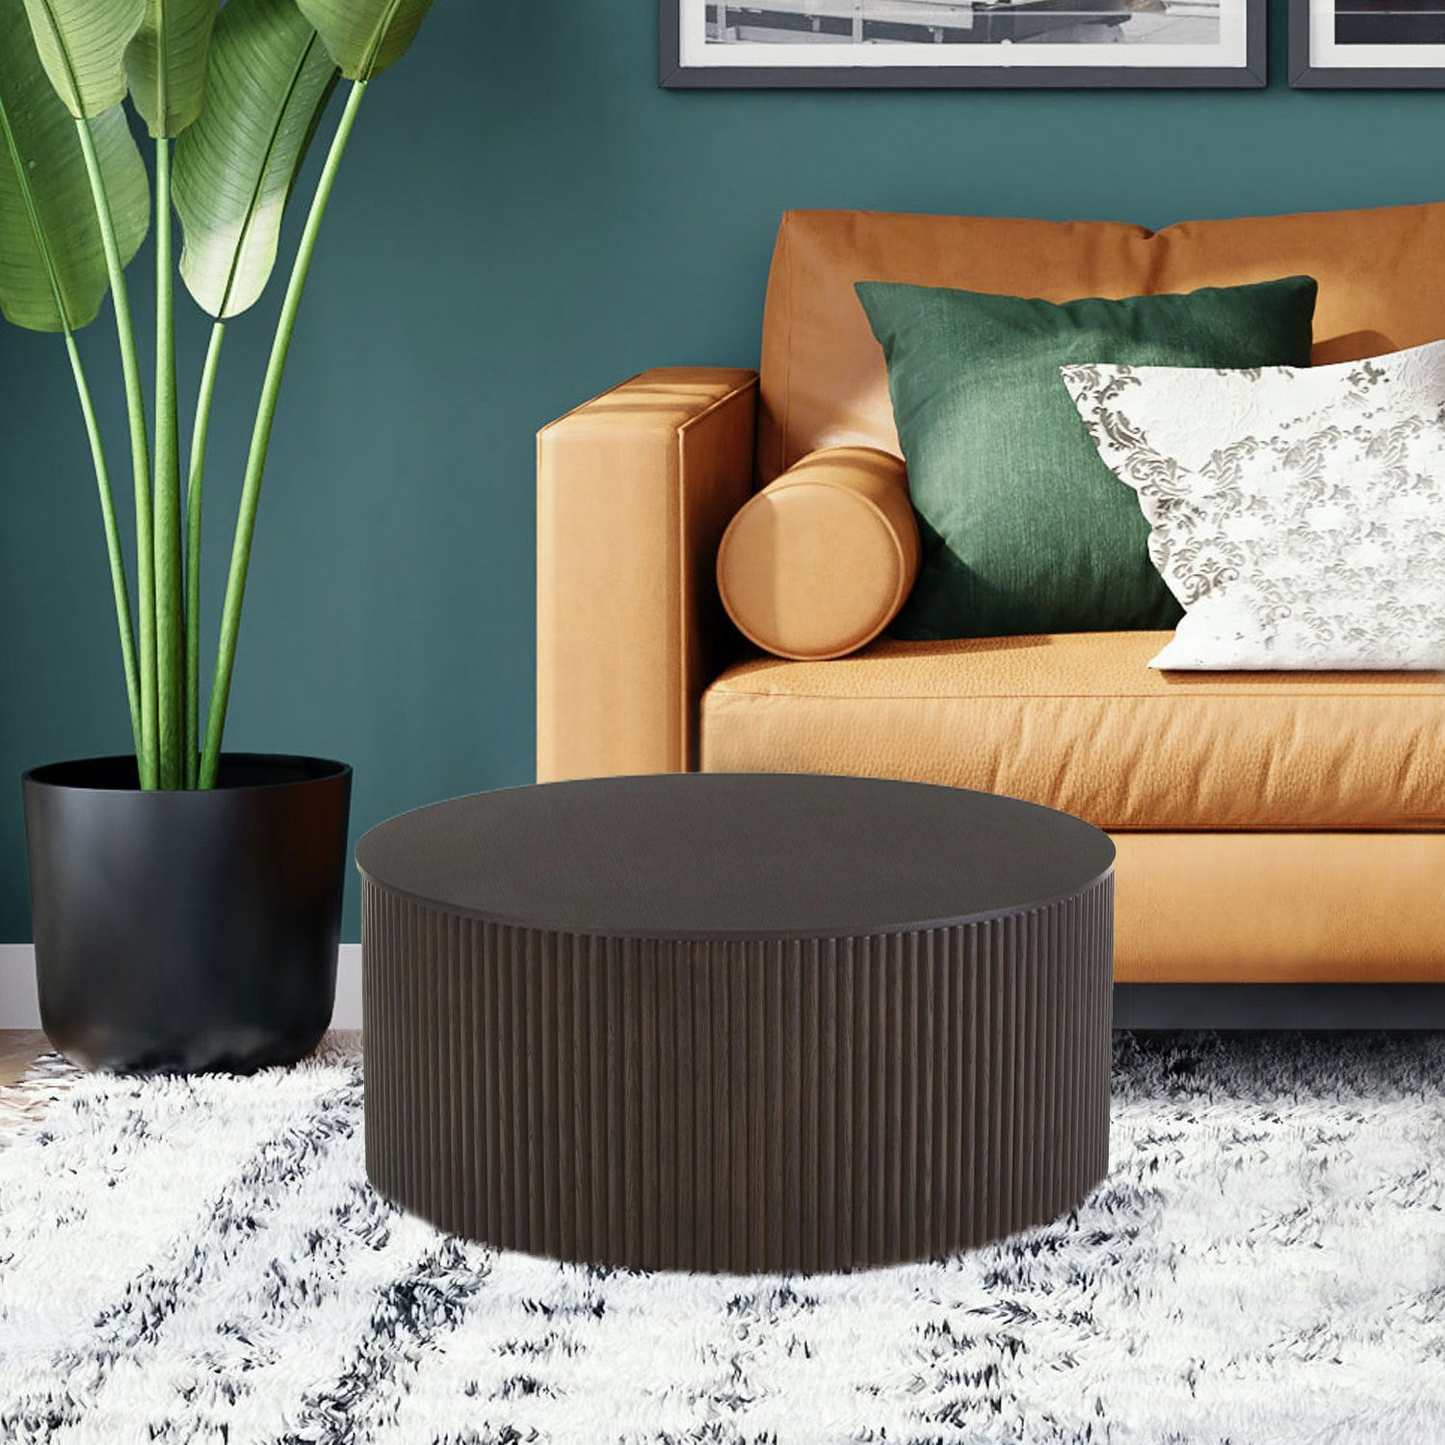 Handmade Round Coffee Table side Table End Table, Fraxinus mandshurica +MDF, Smoky Color, 27.55inch *13.77inch, Goodies N Stuff